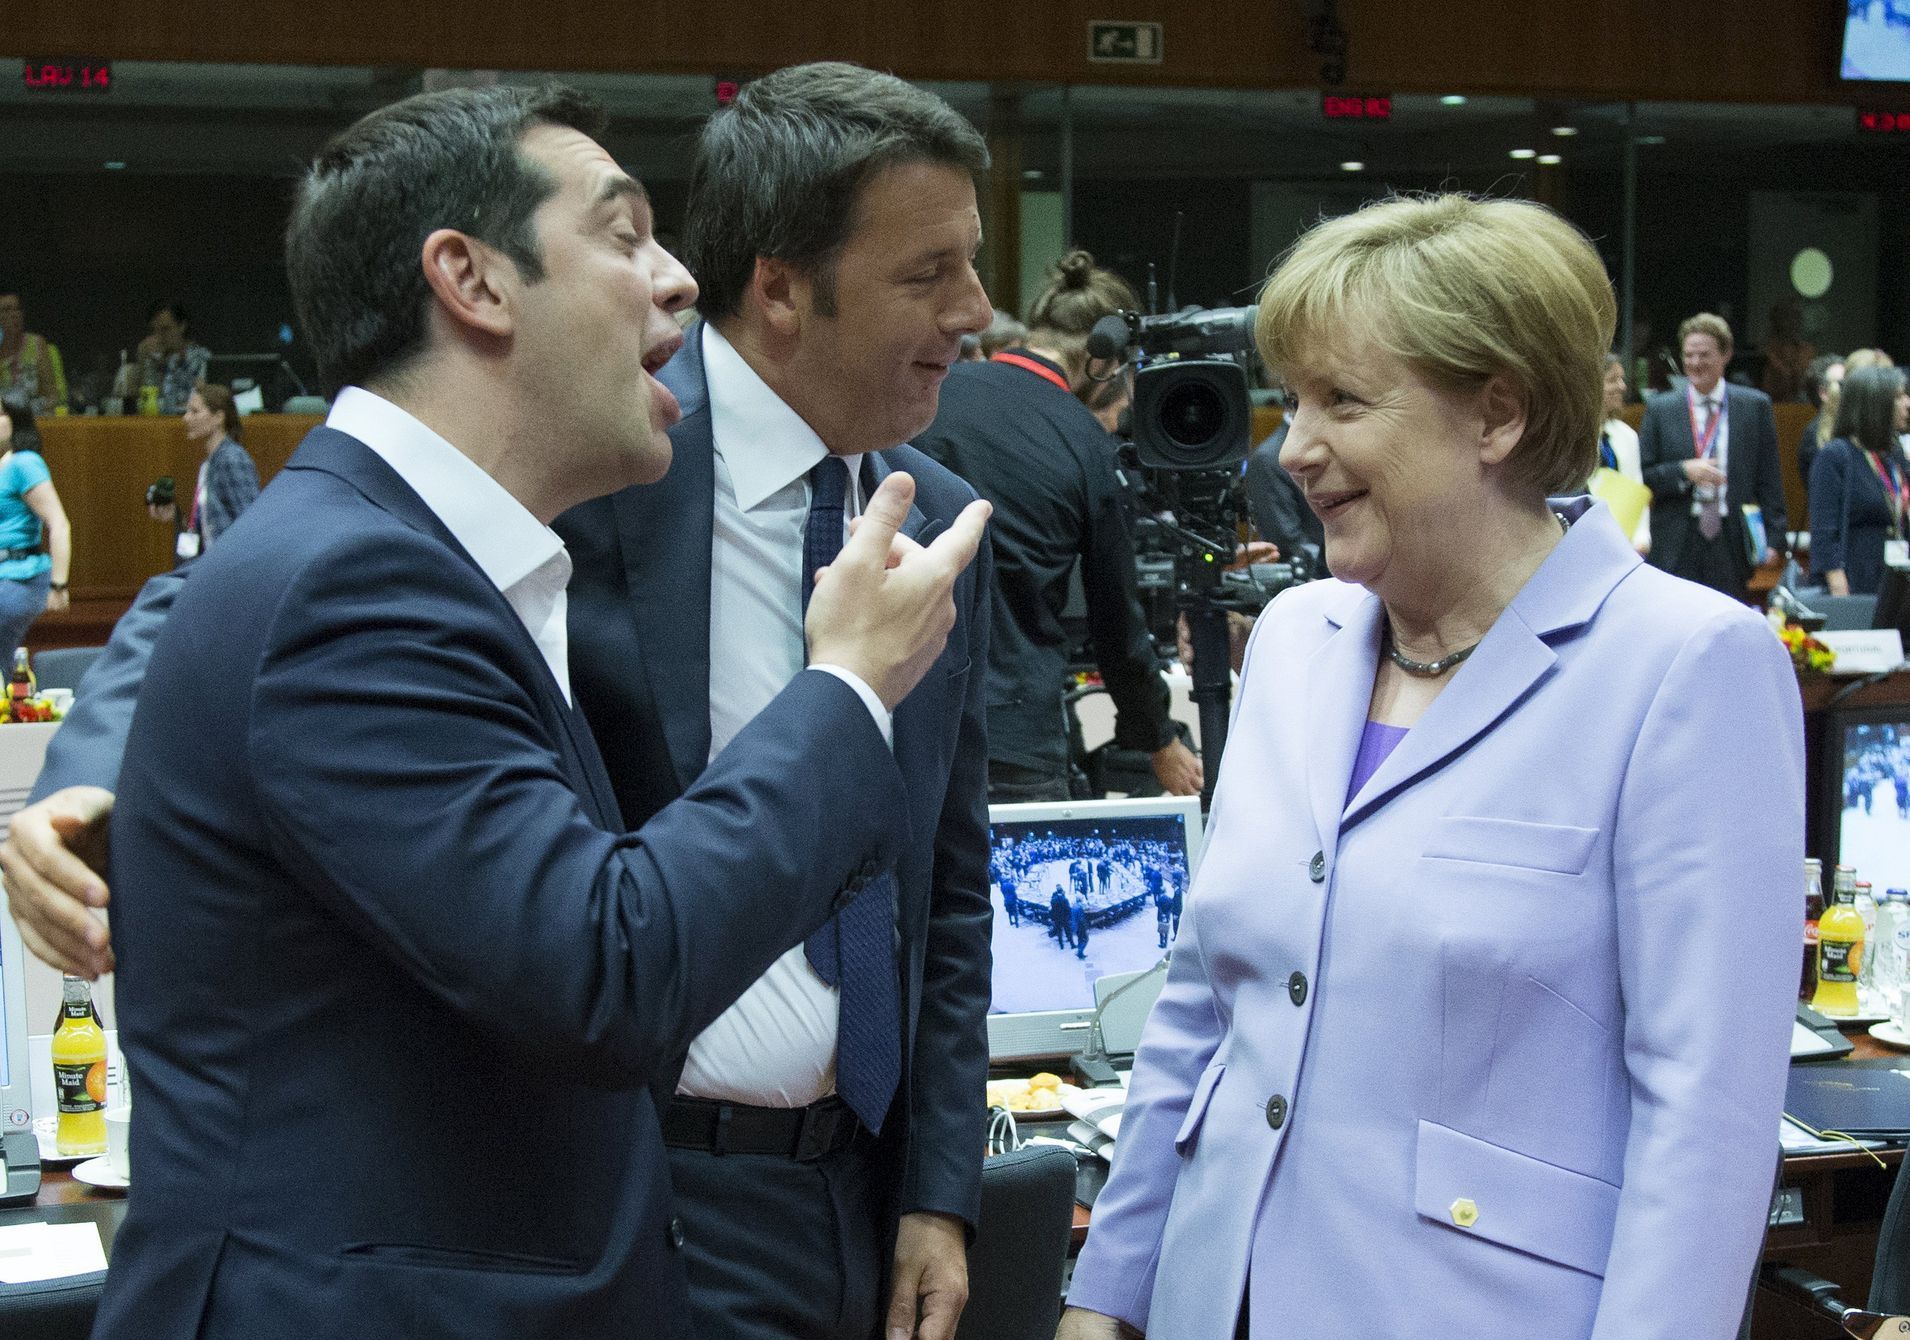 Greek Prime Minister Alexis Tsipras talks to German Chancellor Angela Merkel next to Italian Prime Minister Matteo Renzi at a European Union leaders summit in Brussels